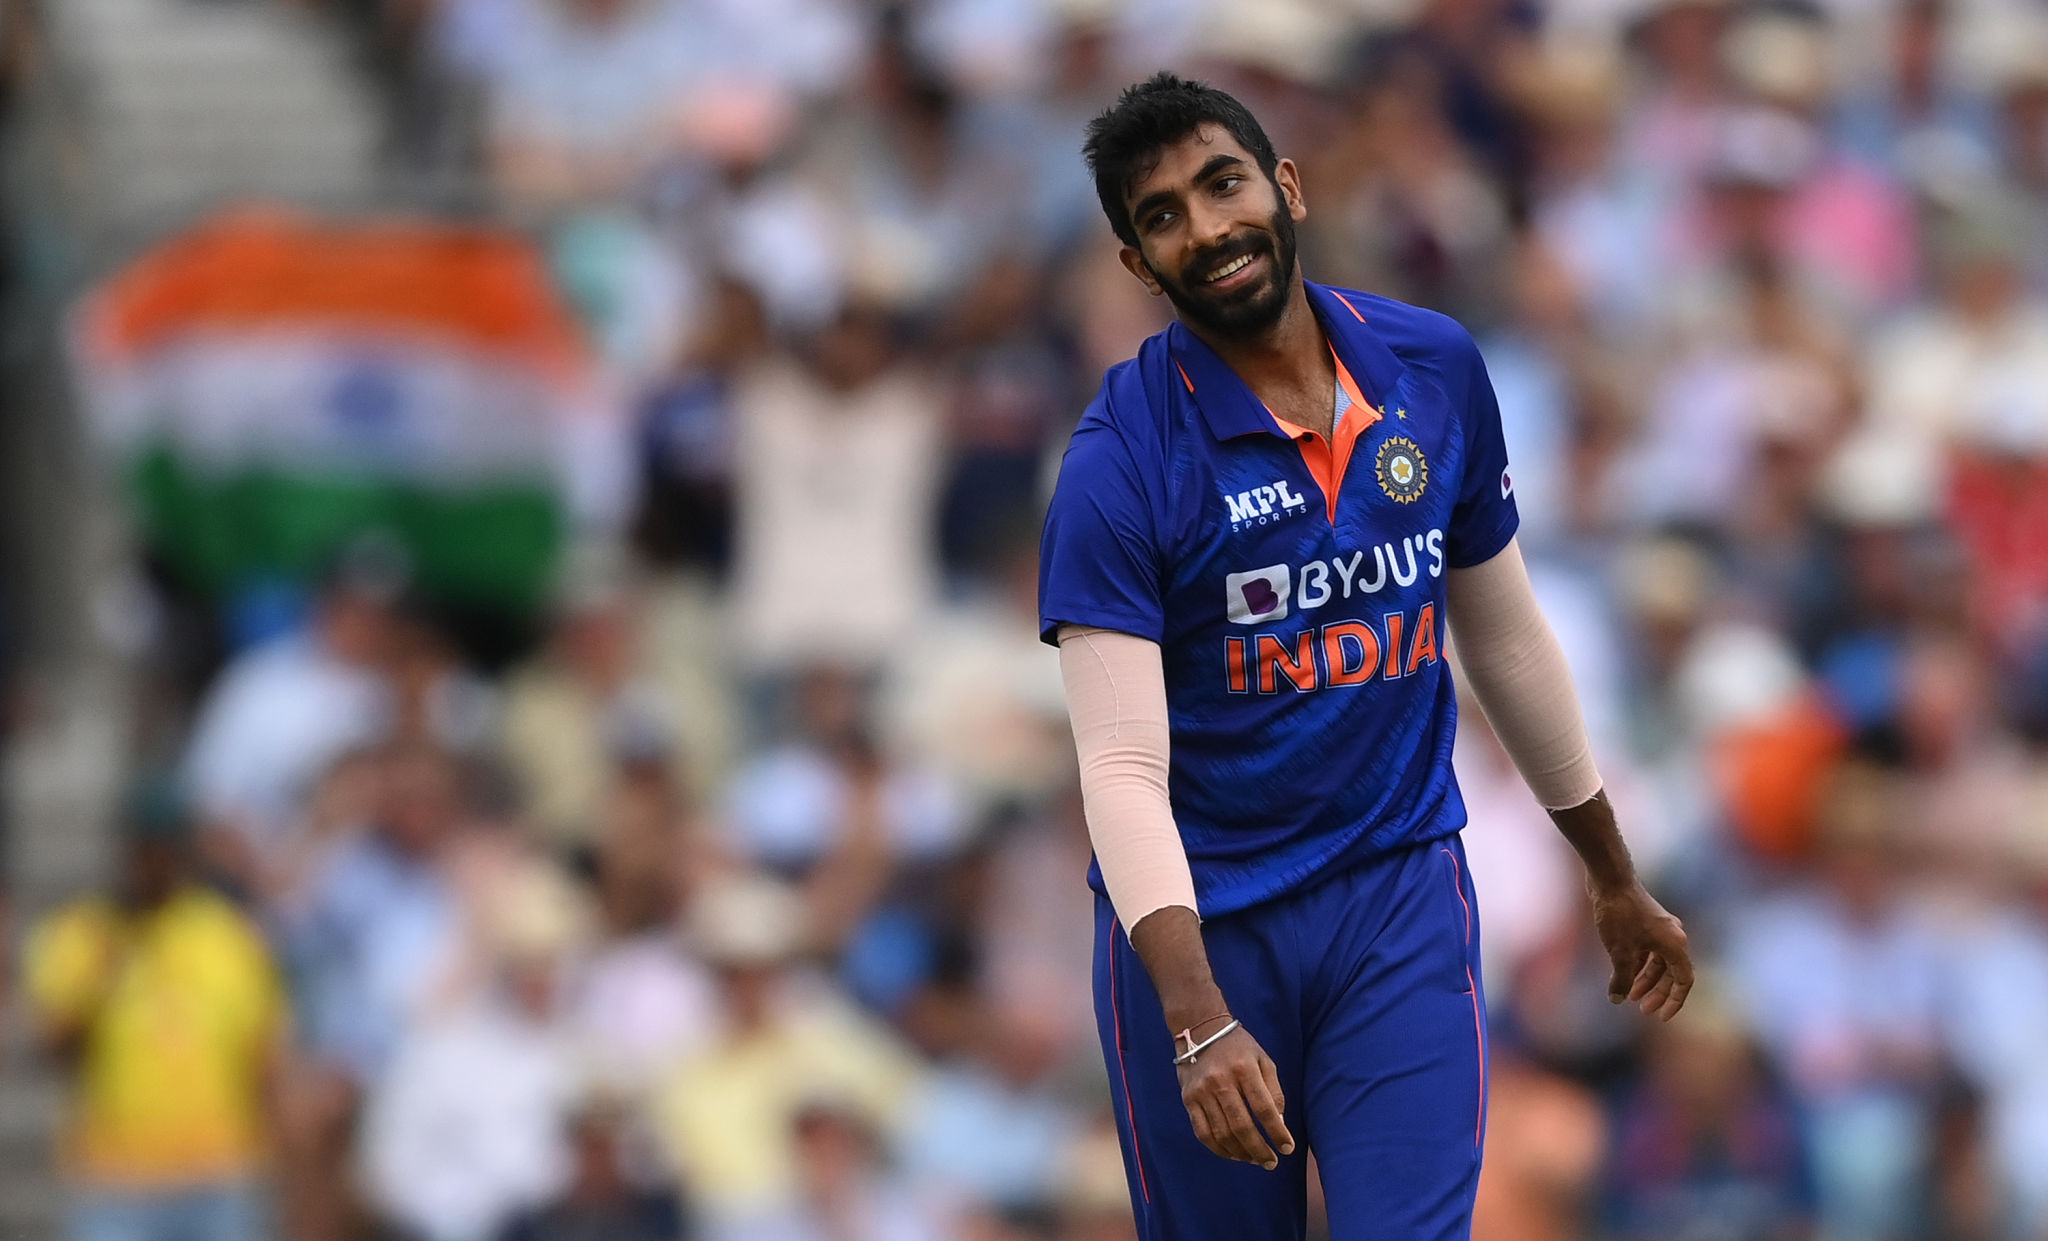 India Squad Asia Cup 2022: Massive BLOW for Team India ahead of Asia Cup, Jasprit Bumrah UNLIKELY due to injury: Jasprit Bumrah Injured, Follow LIVE Updates